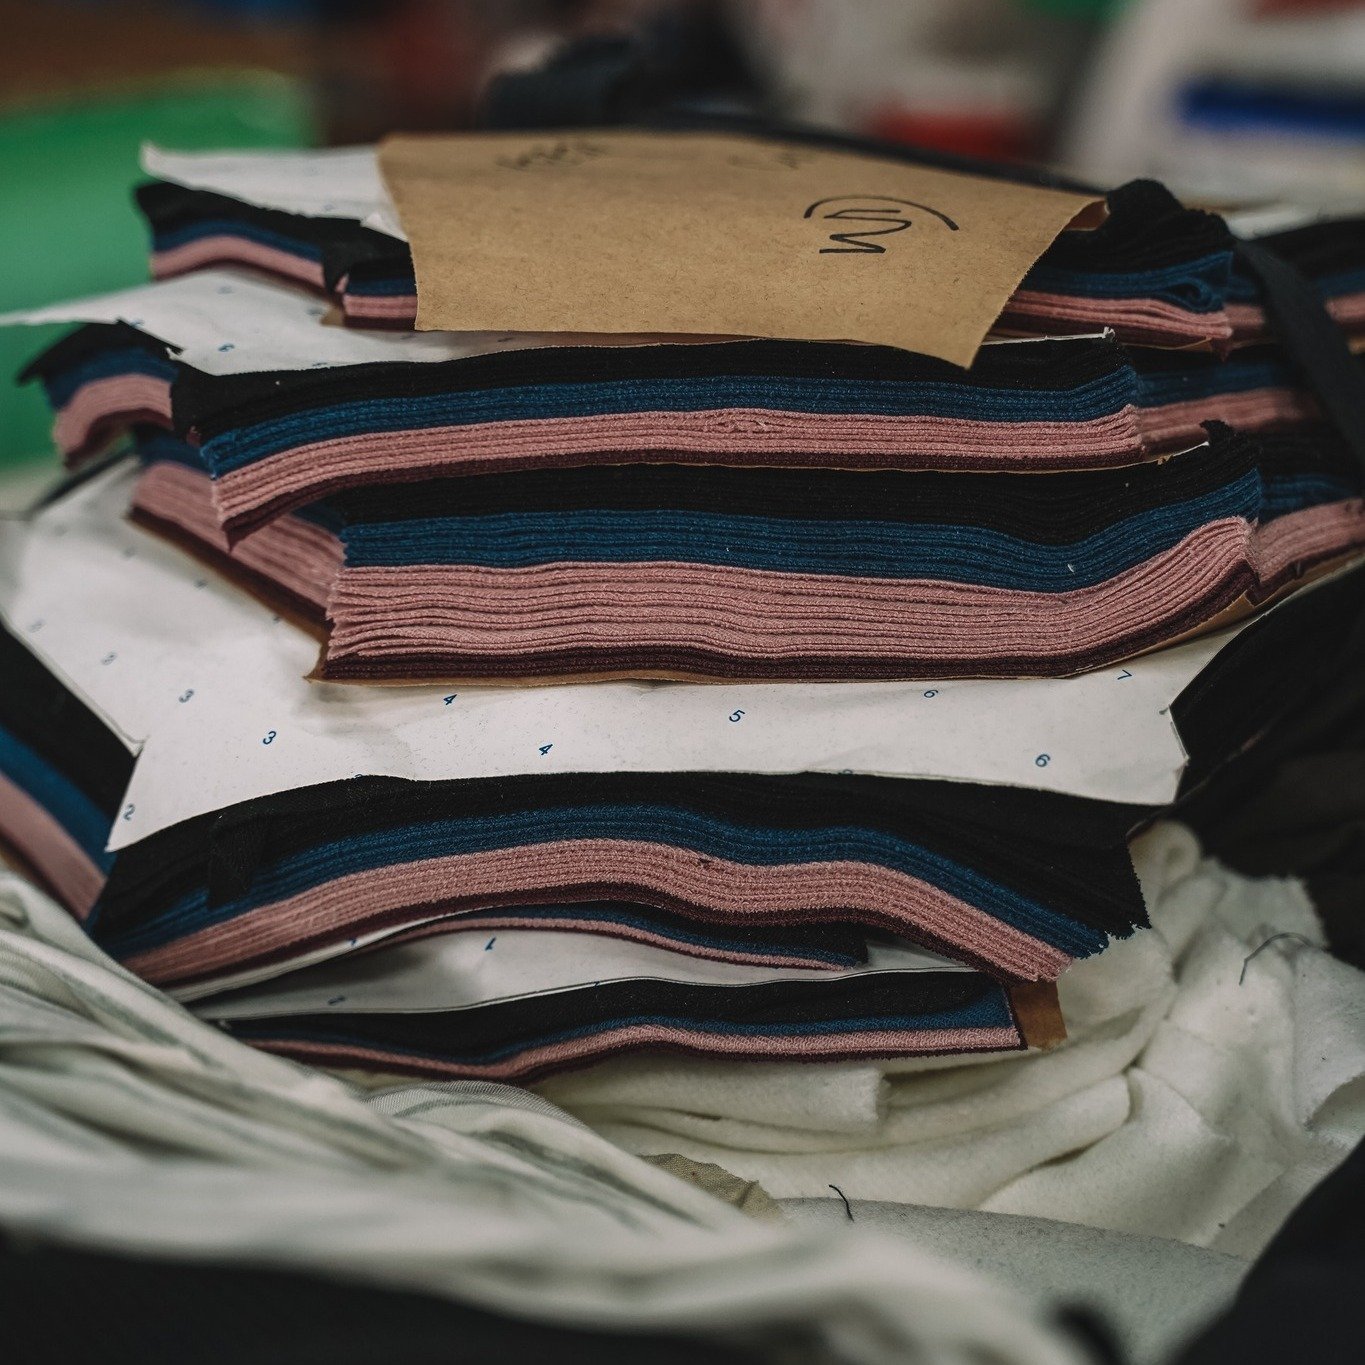 It may not look like much now, but this stack of freshly cut fabric will soon be on its way to the sewing room to transform into finished garments!

🧵Learn more at crwdesign.ca
.
.
.
#CRWDesign #CanadianFashion #SustainableStyle #EthicalFashion #Mad